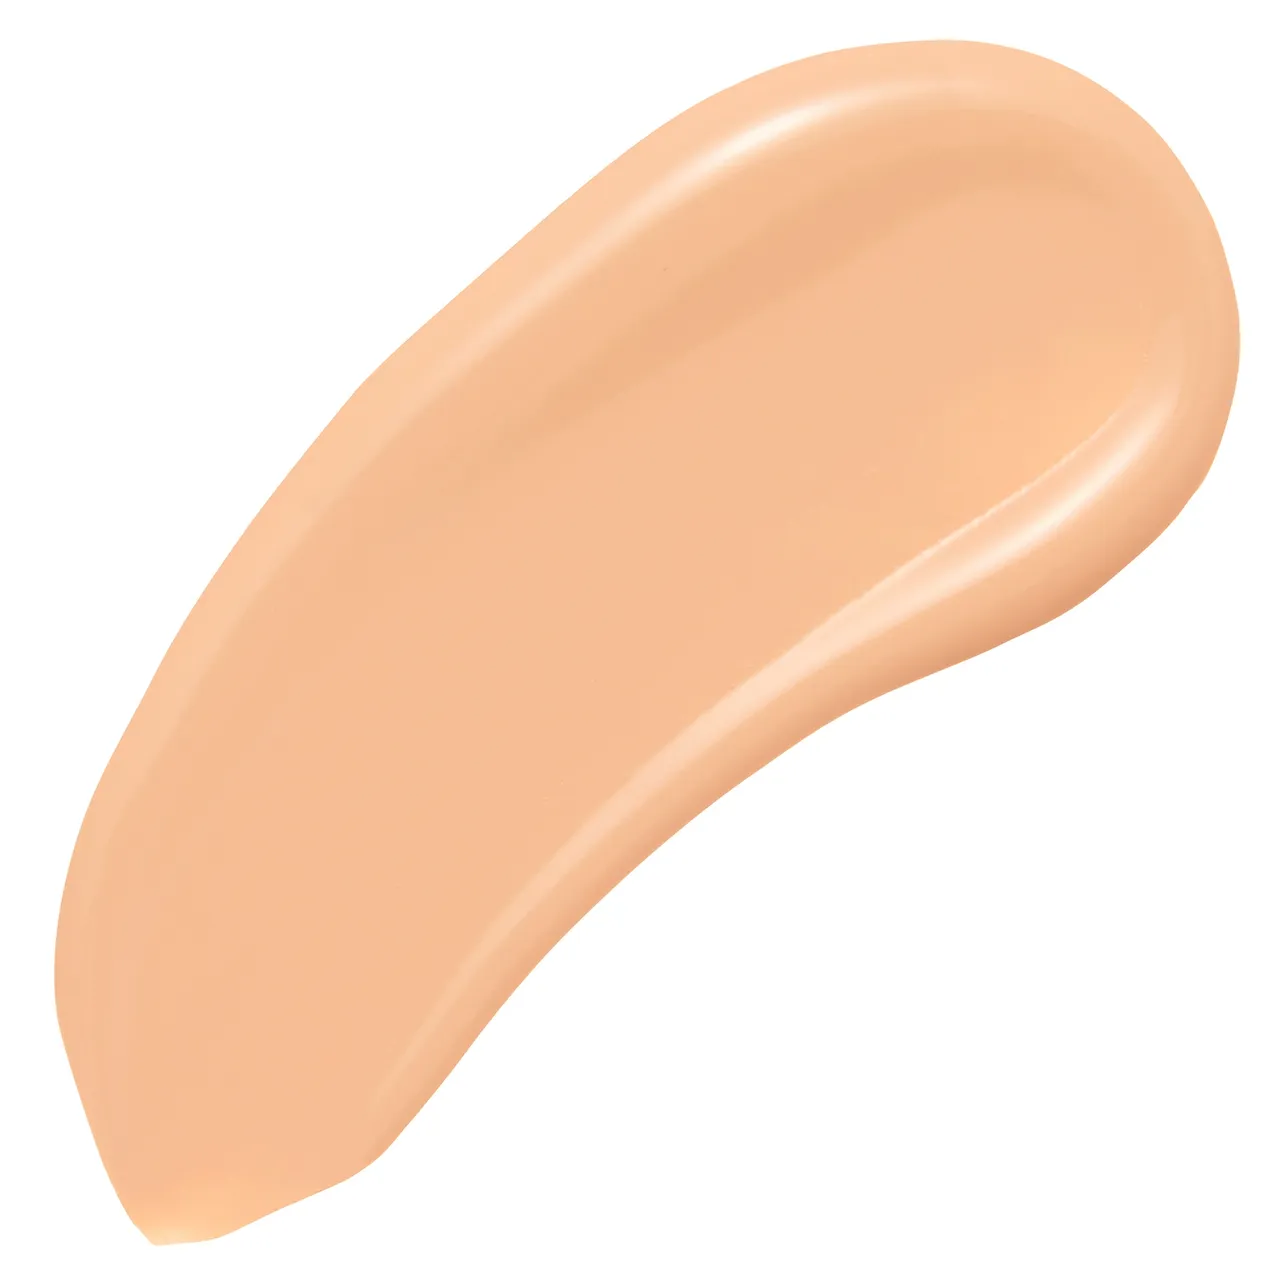 Maybelline Fit Me! Matte and Poreless Foundation 30ml (Various Shades) - 115 Ivory